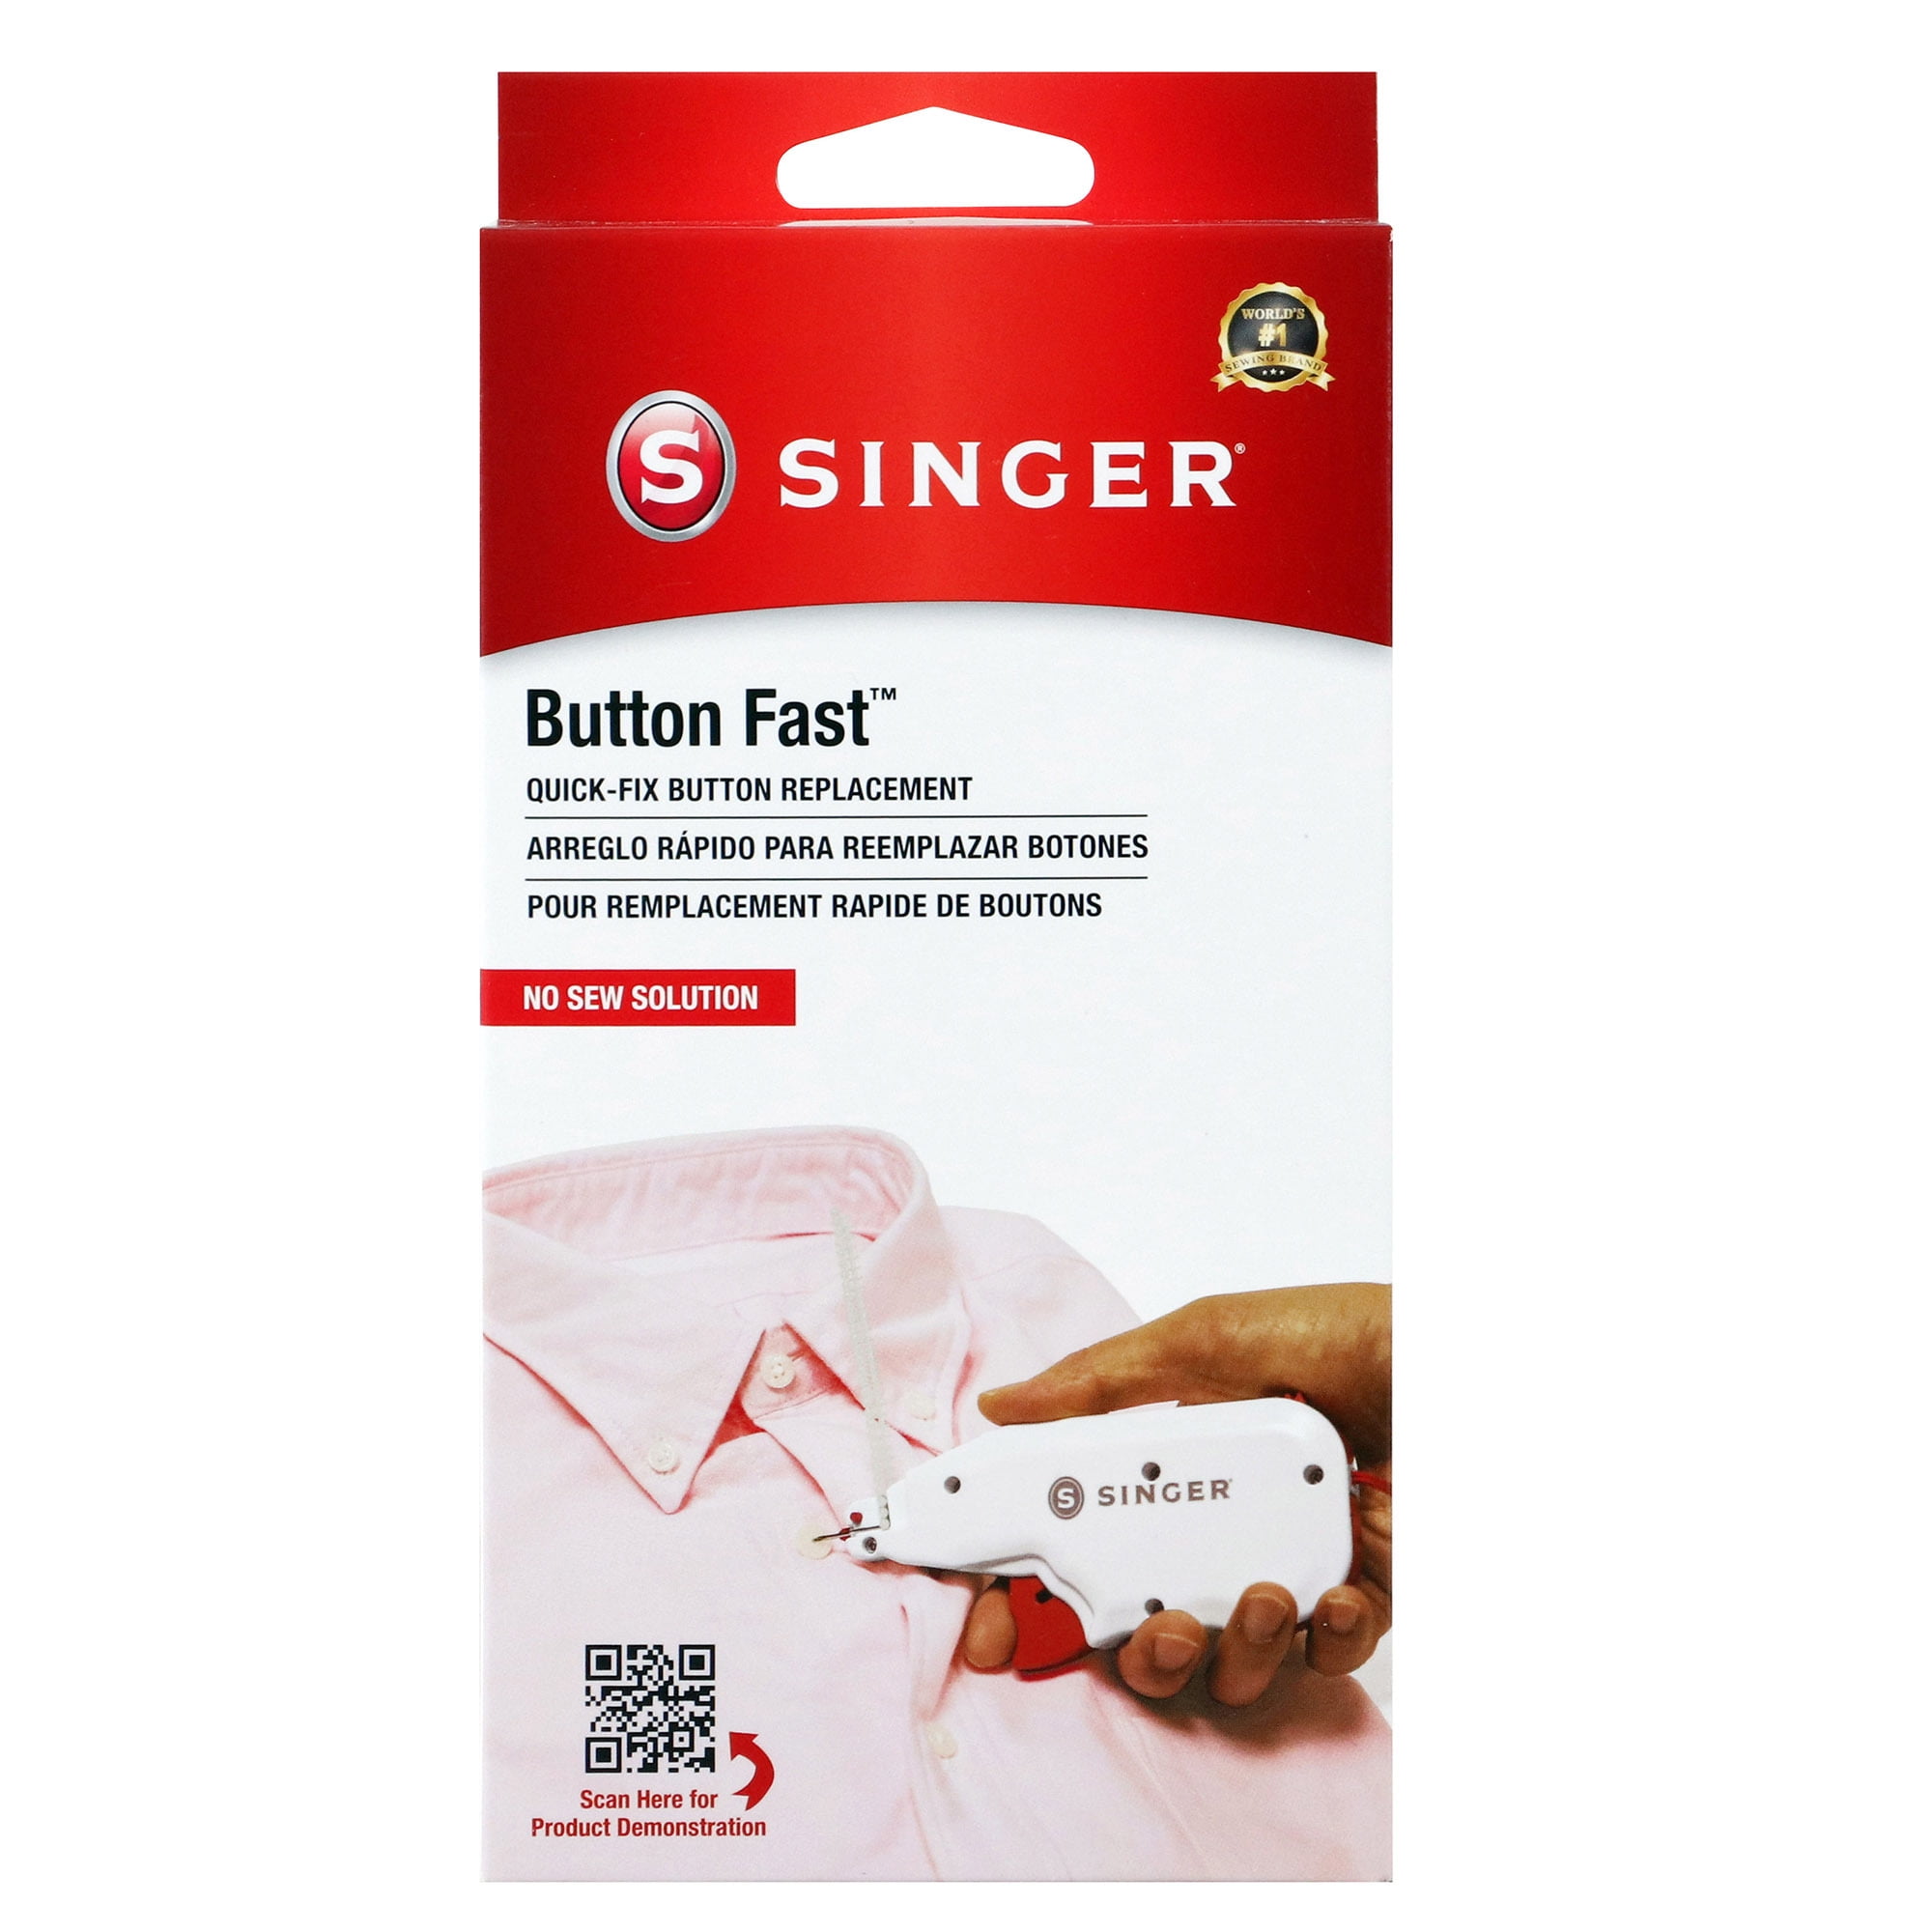 Singer Button Fast Quick-Fix Button Replacement Tool - 41933